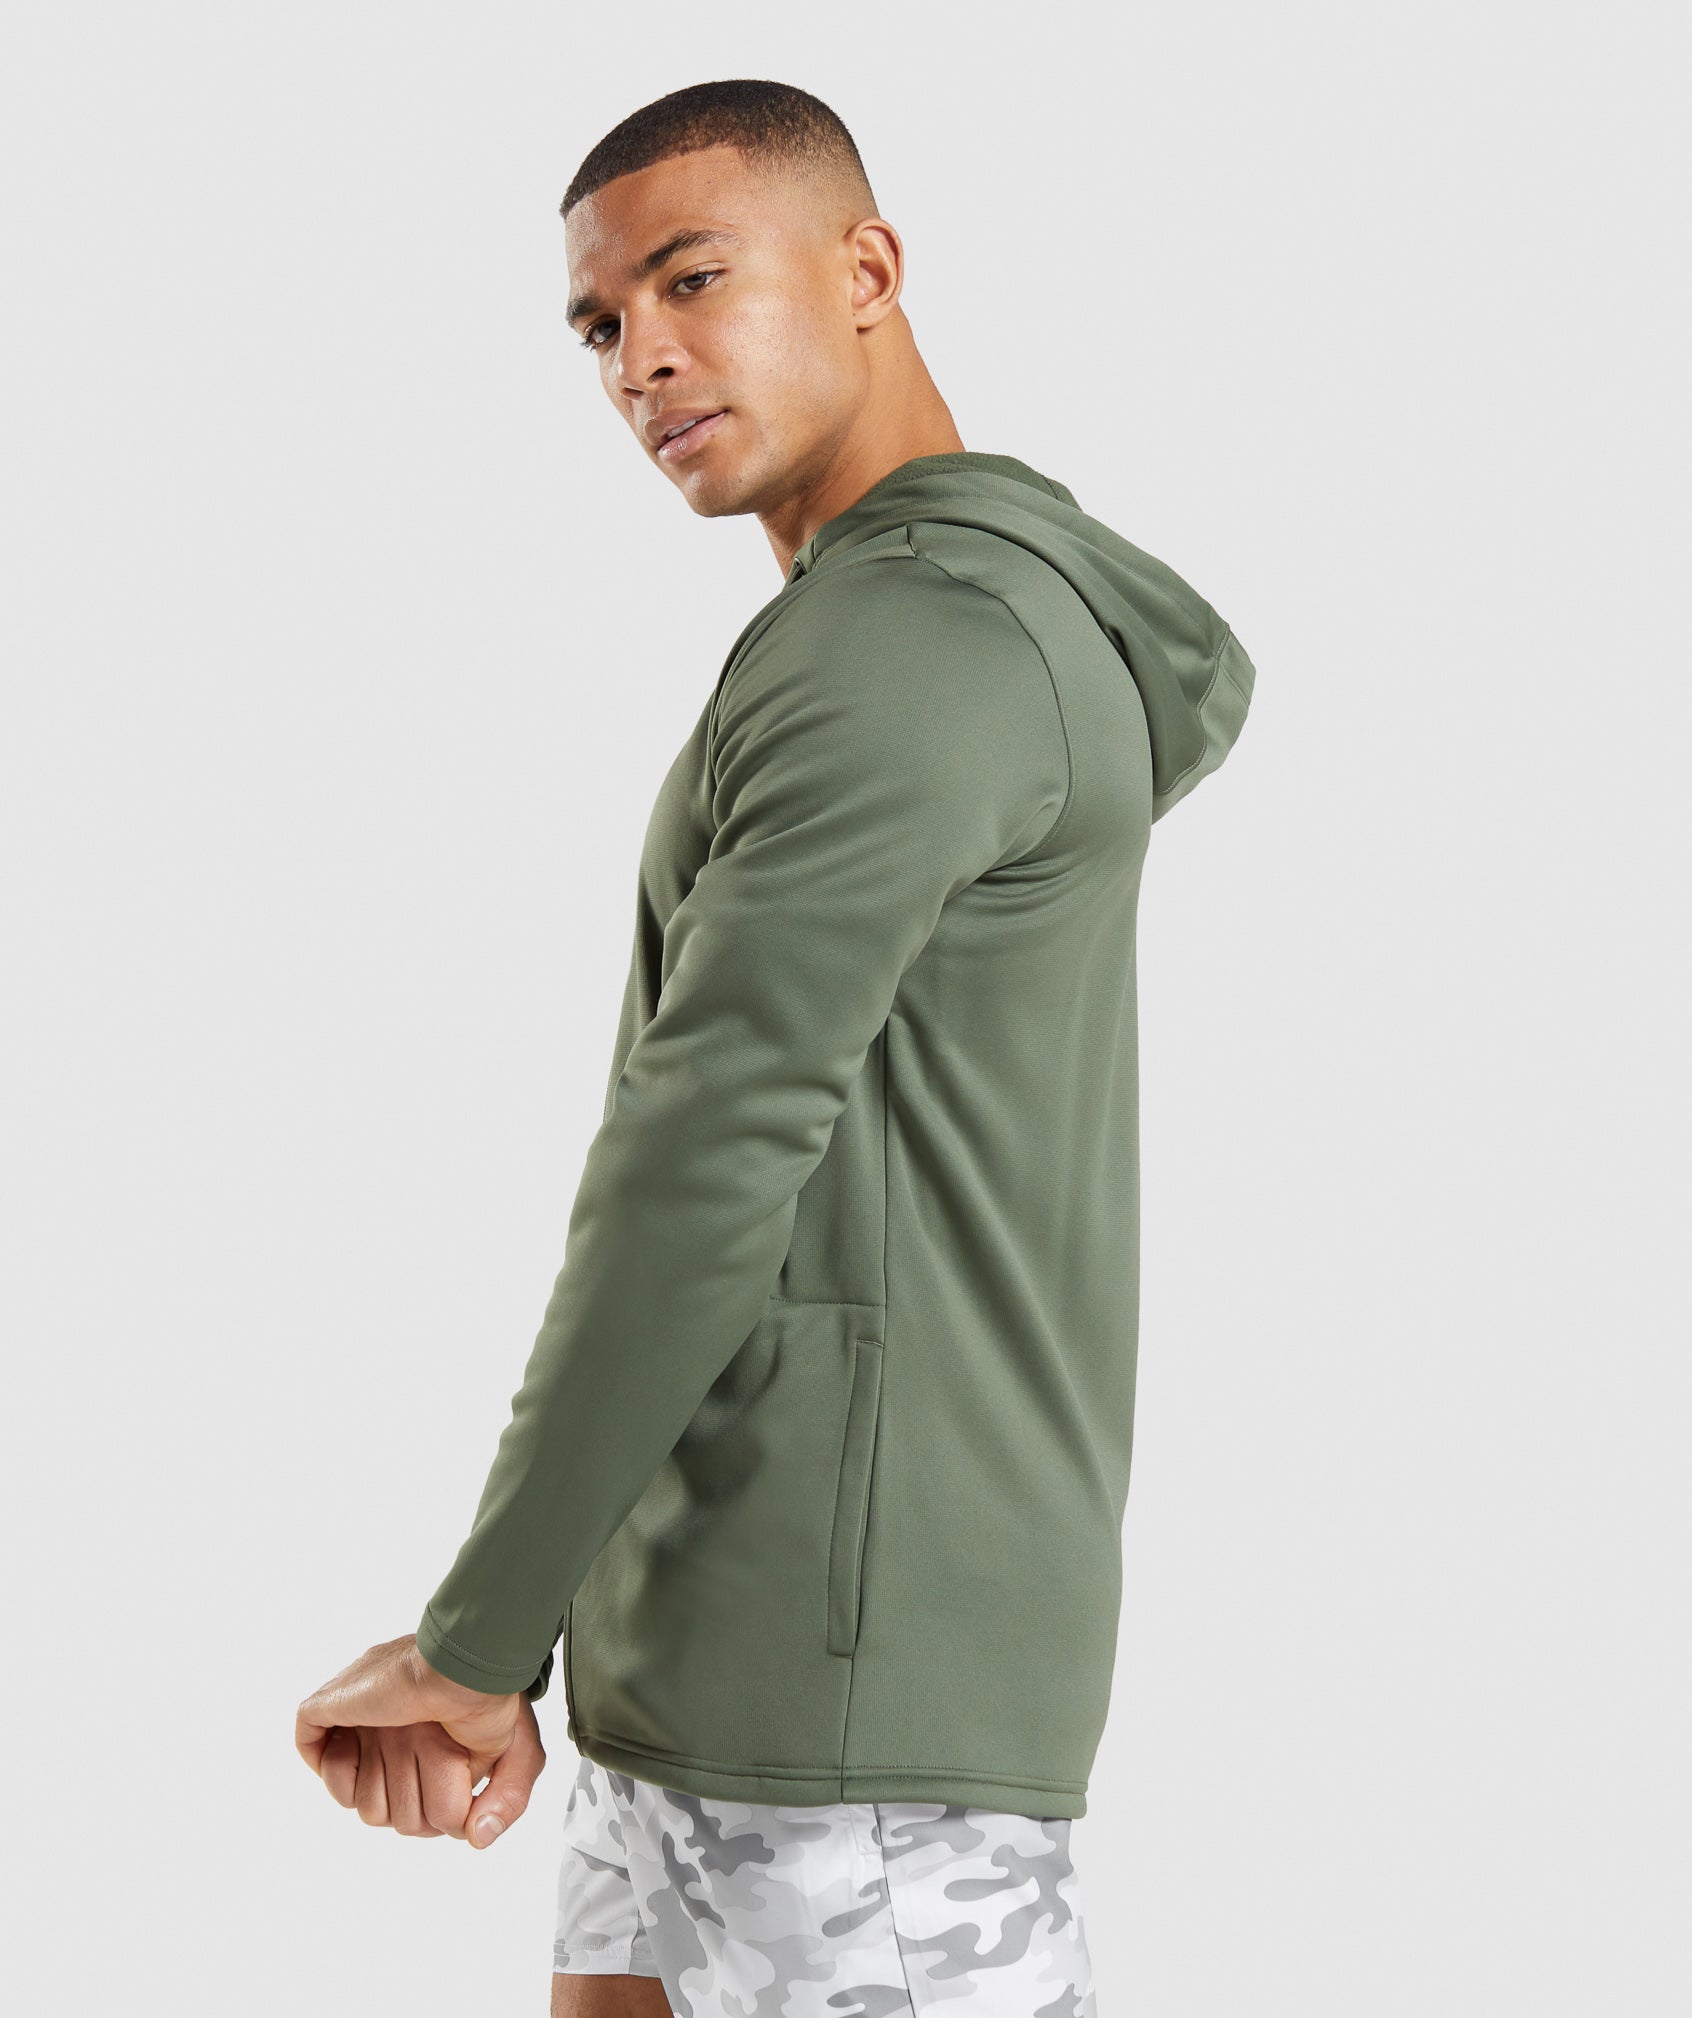 Arrival Zip Up Hoodie in Core Olive - view 3